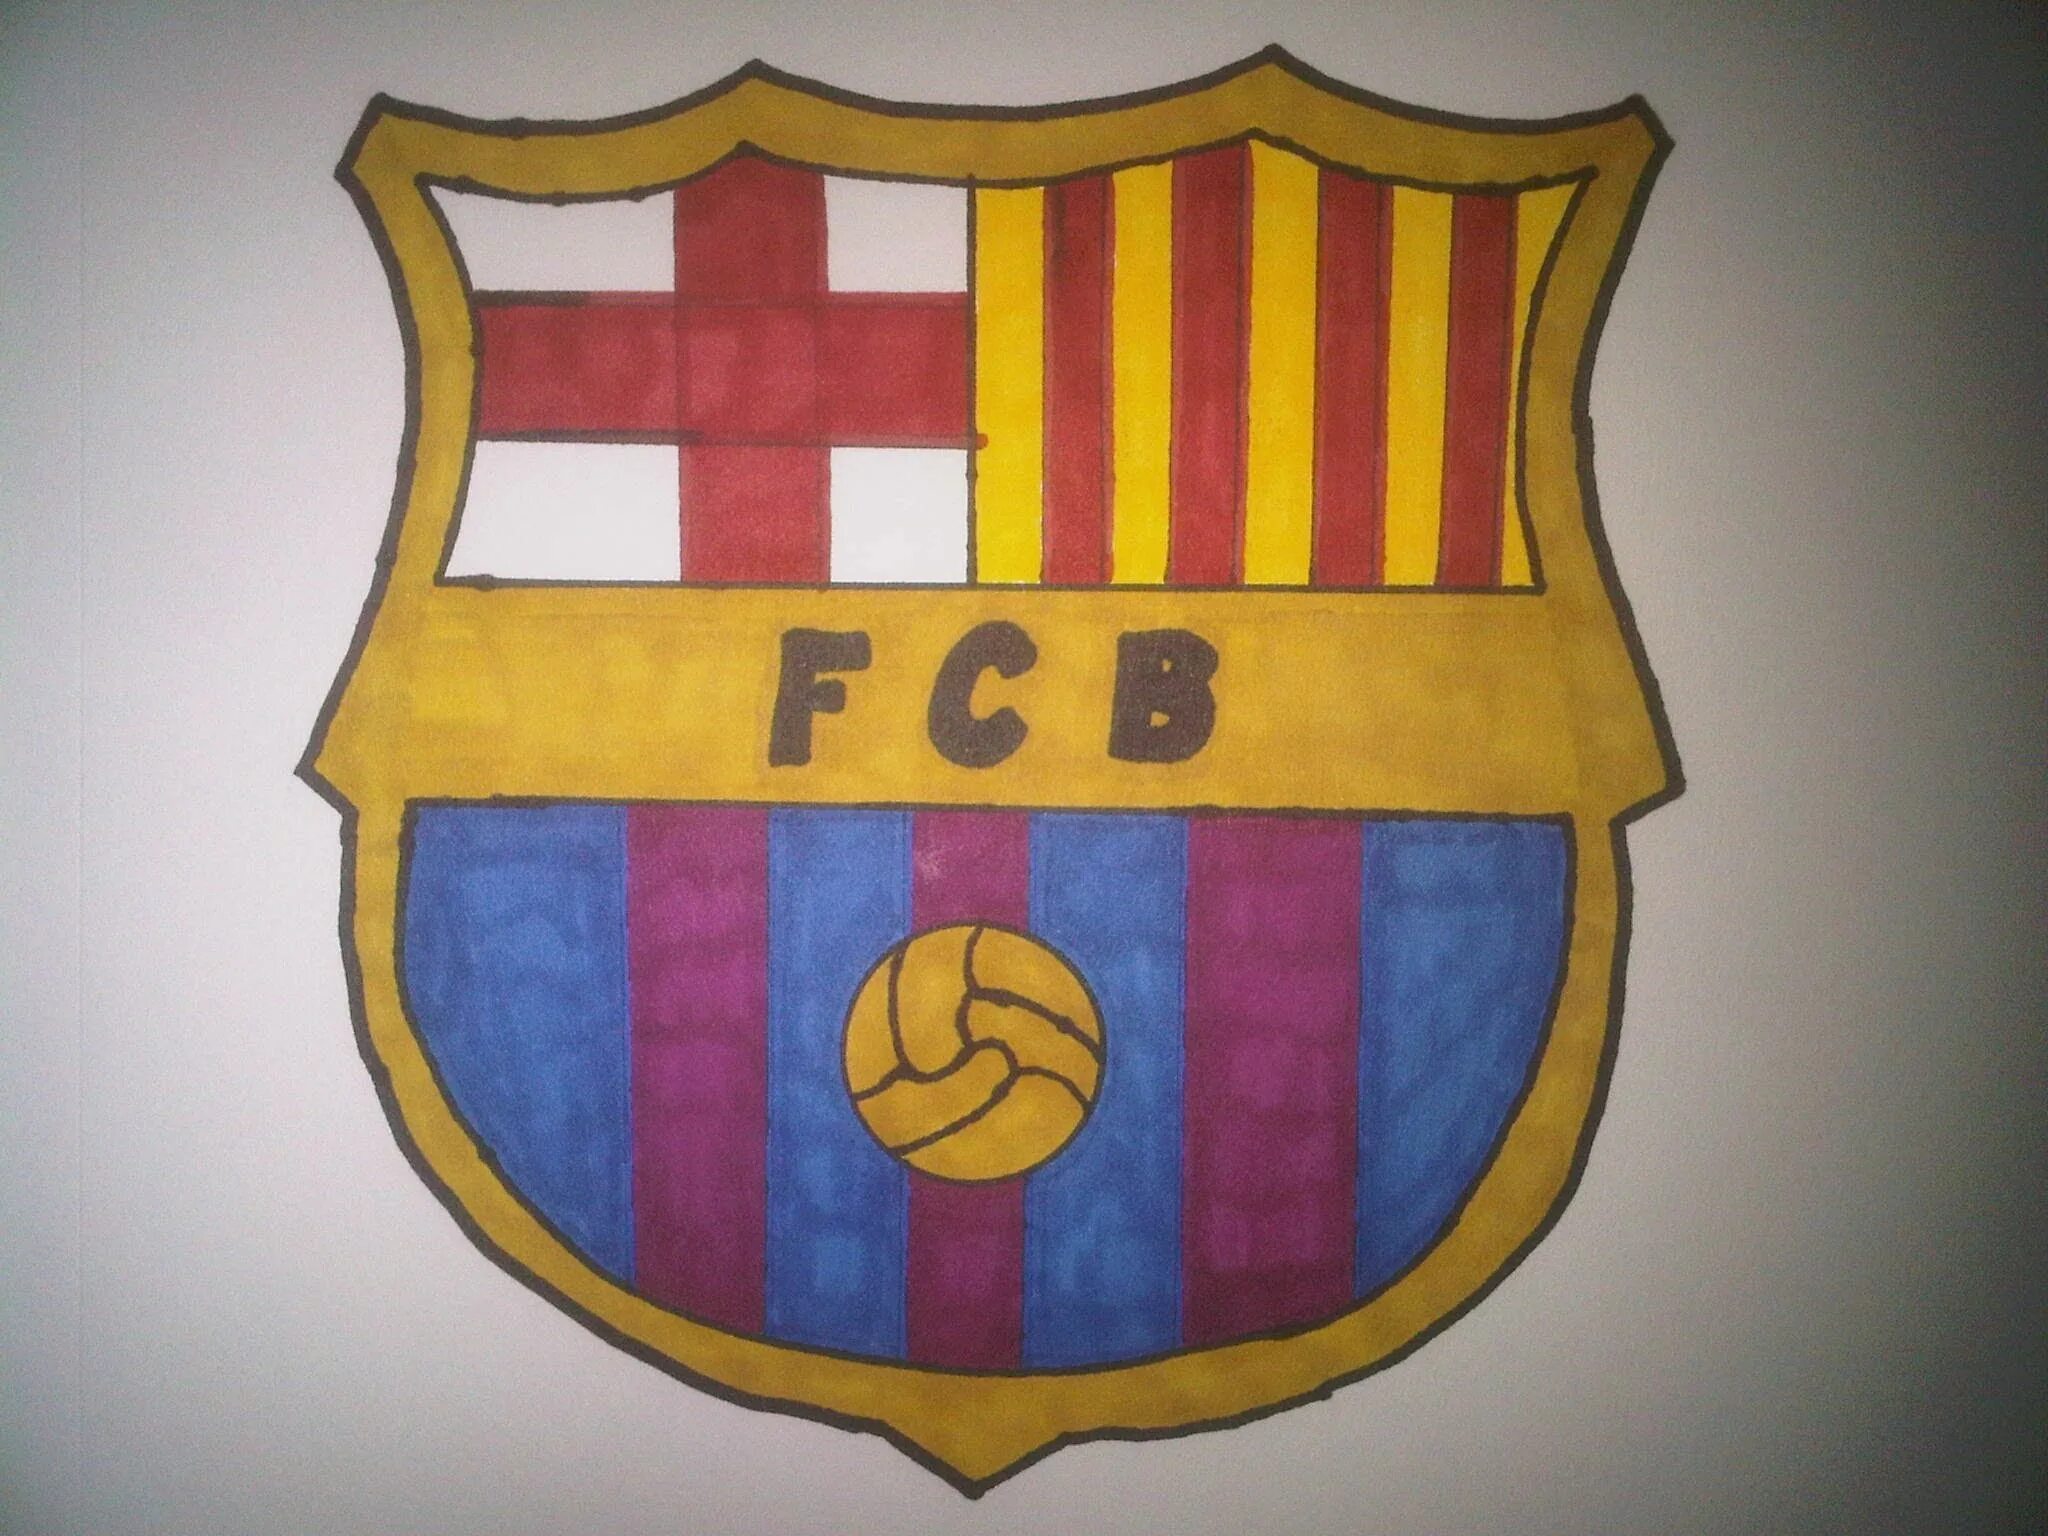 Barcelona emblem coloring page with bright colors